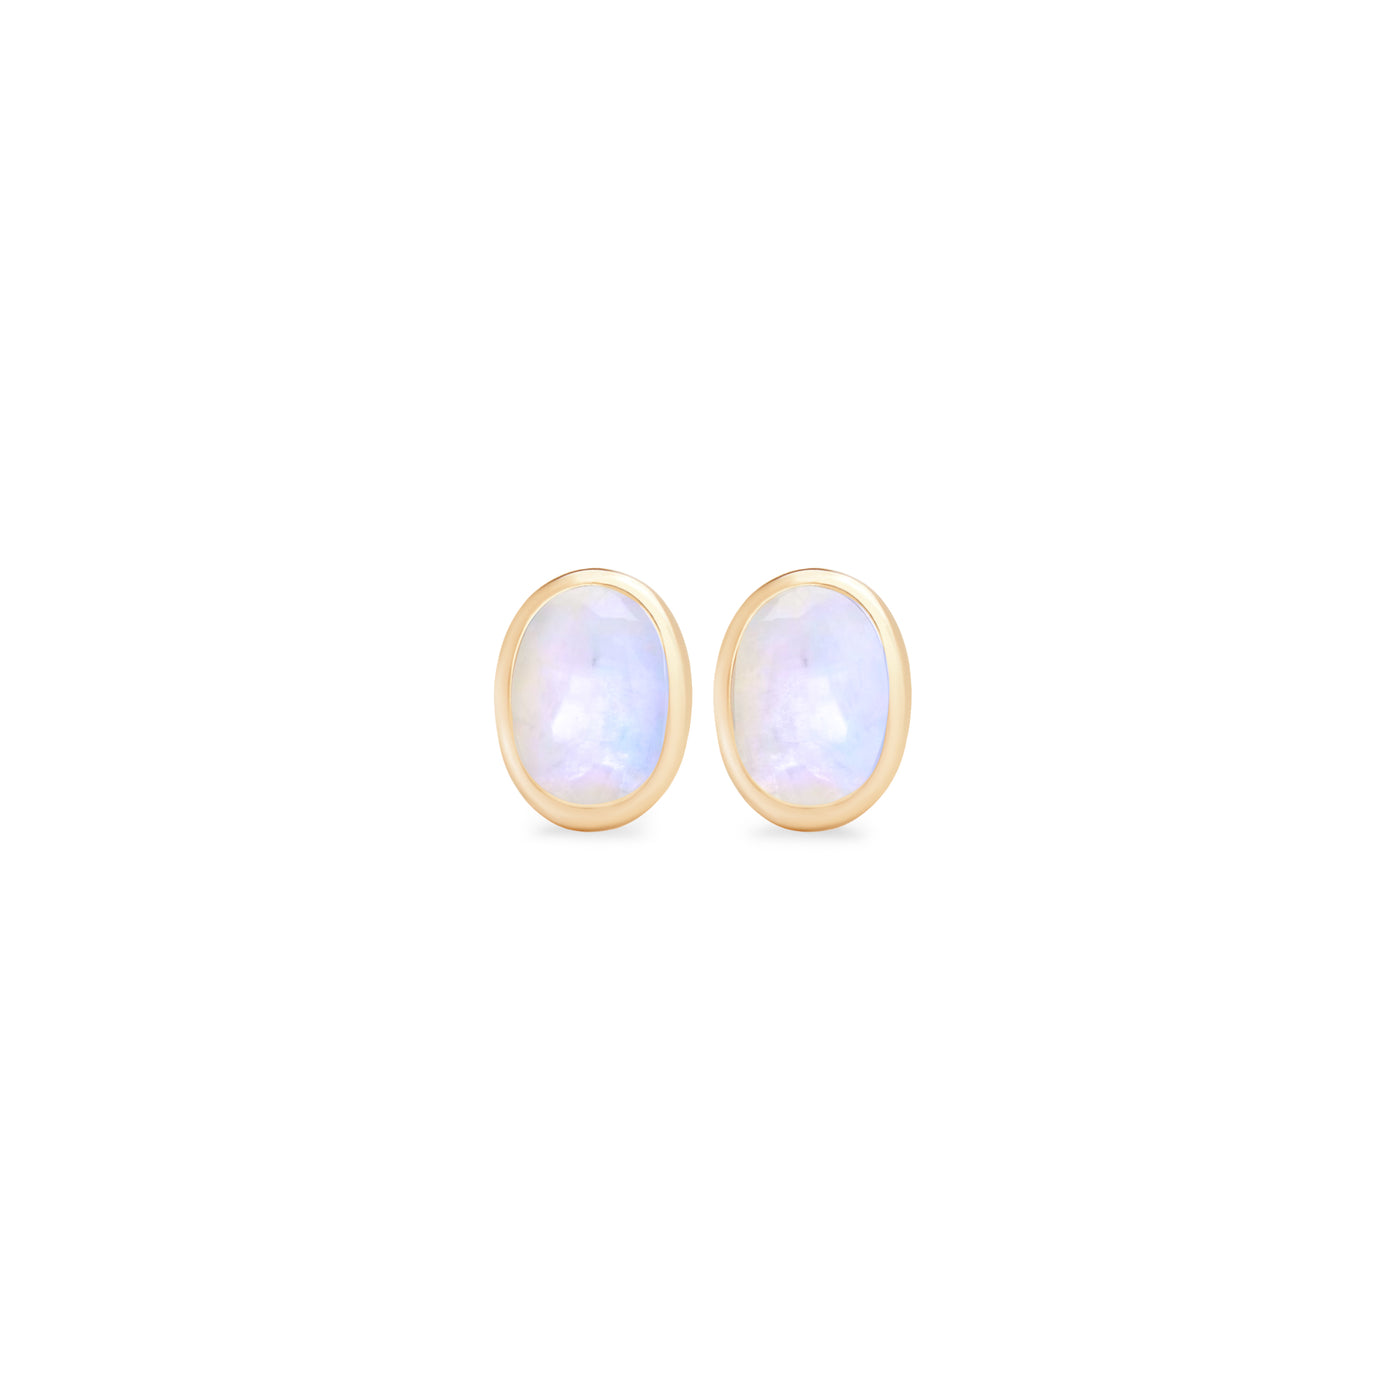 14 Karat Yellow Gold Studs with Oval Shaped Moonstone Stone Against White Background